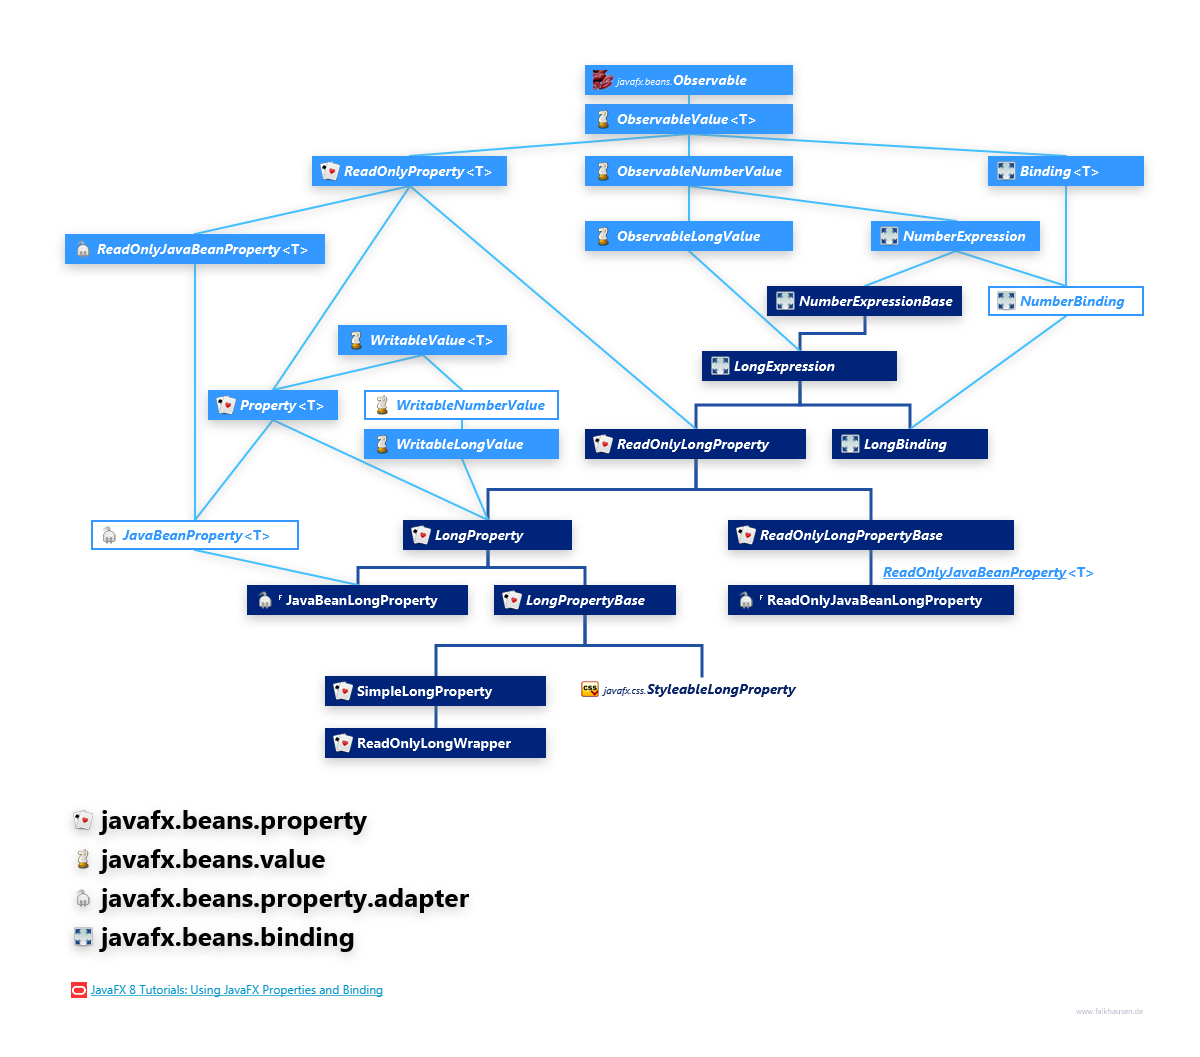 javafx.beans.property javafx.beans.value javafx.beans.property.adapter javafx.beans.binding LongProperty Hierarchy class diagram and api documentation for JavaFX 8